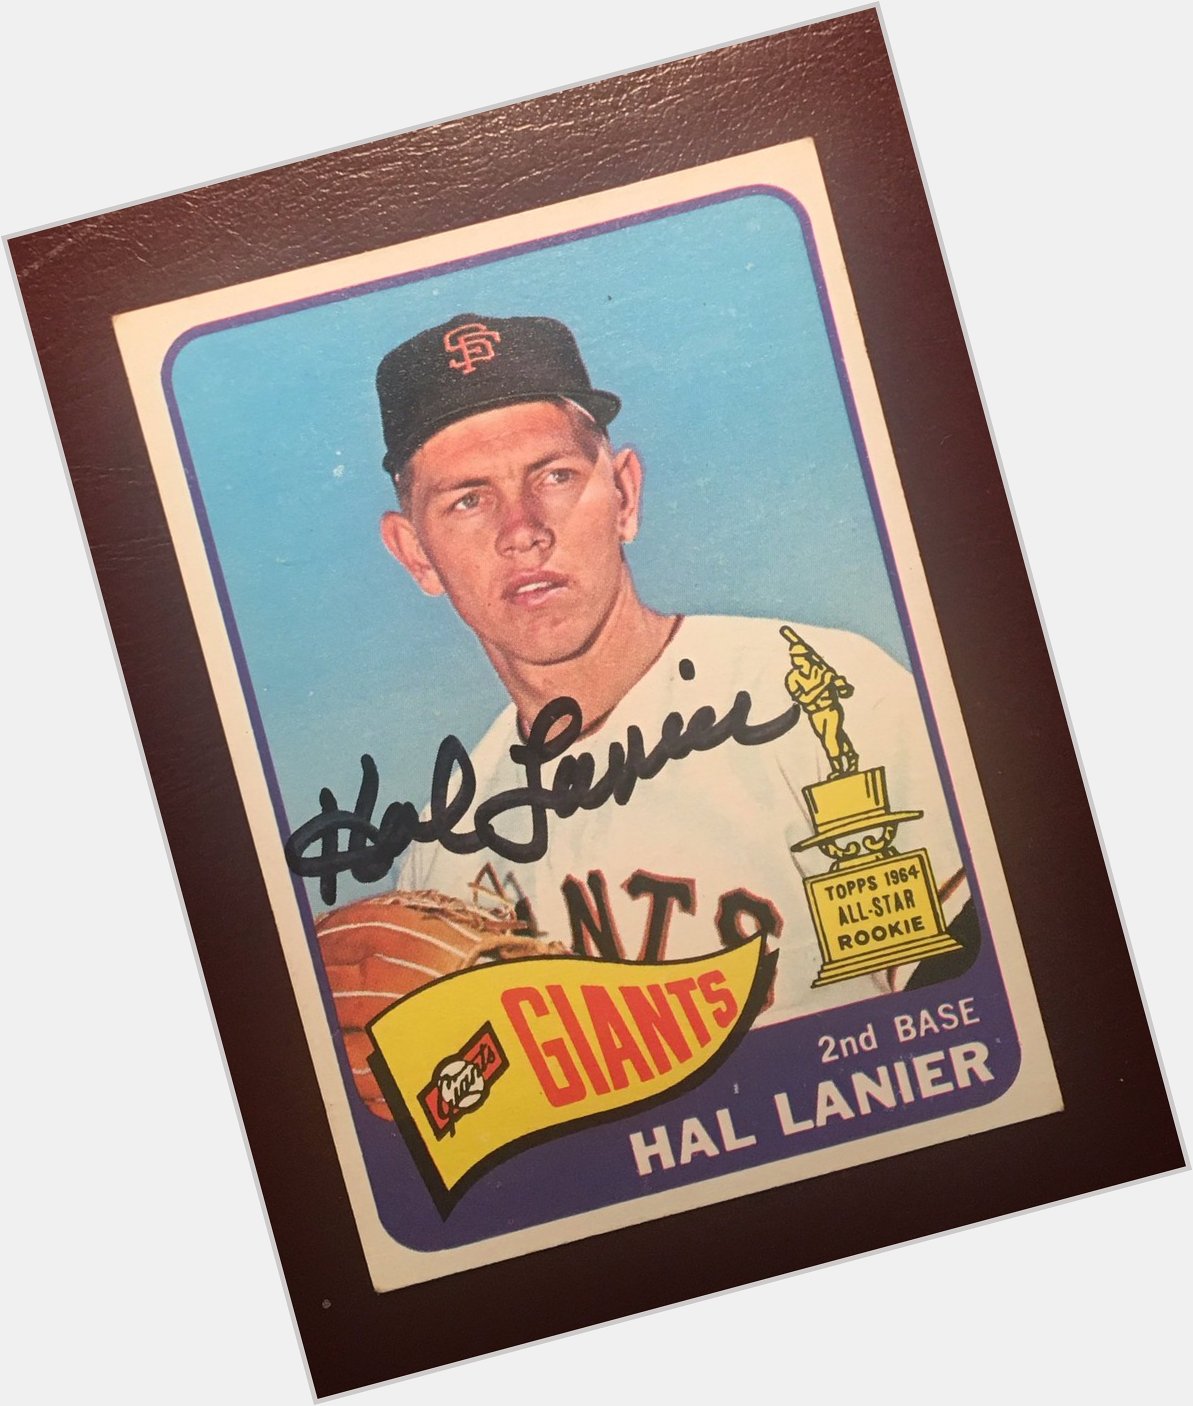  1965 Topps Rookie  Happy Birthday to you Hal Lanier!   